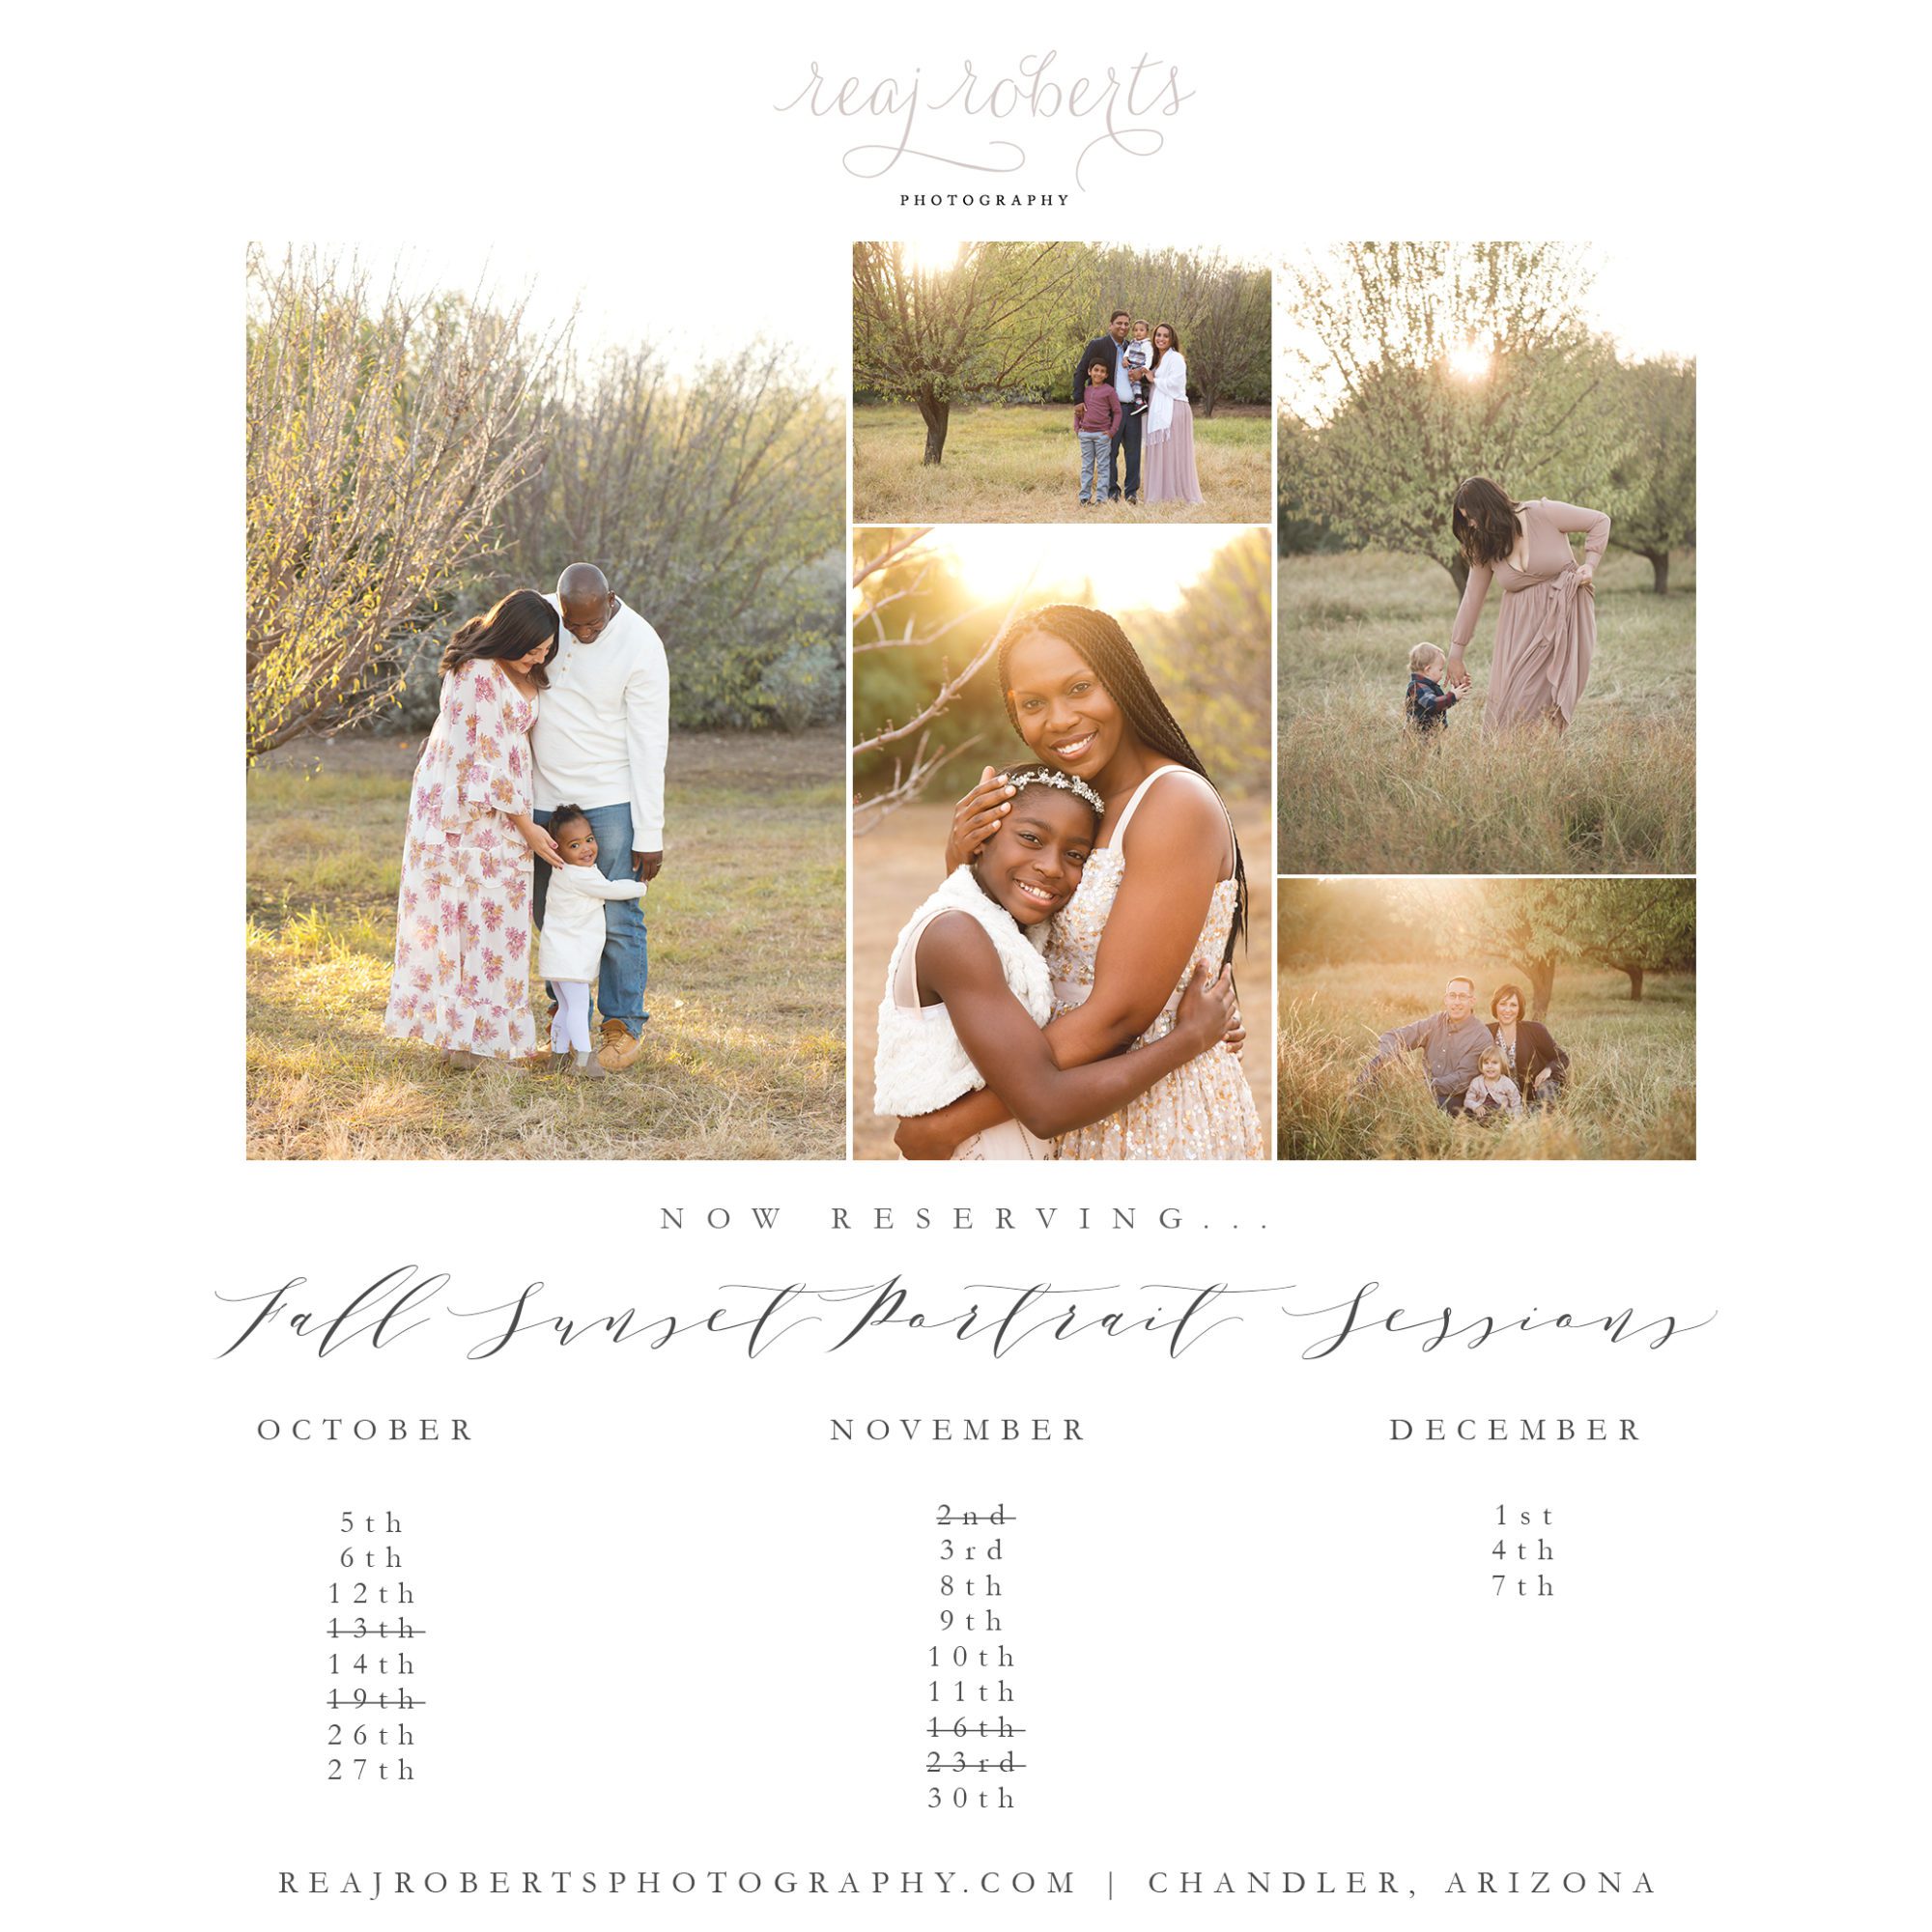 Reaj Roberts Photography 2019 Fall Sunset Portrait Sessions Chandler Photographer